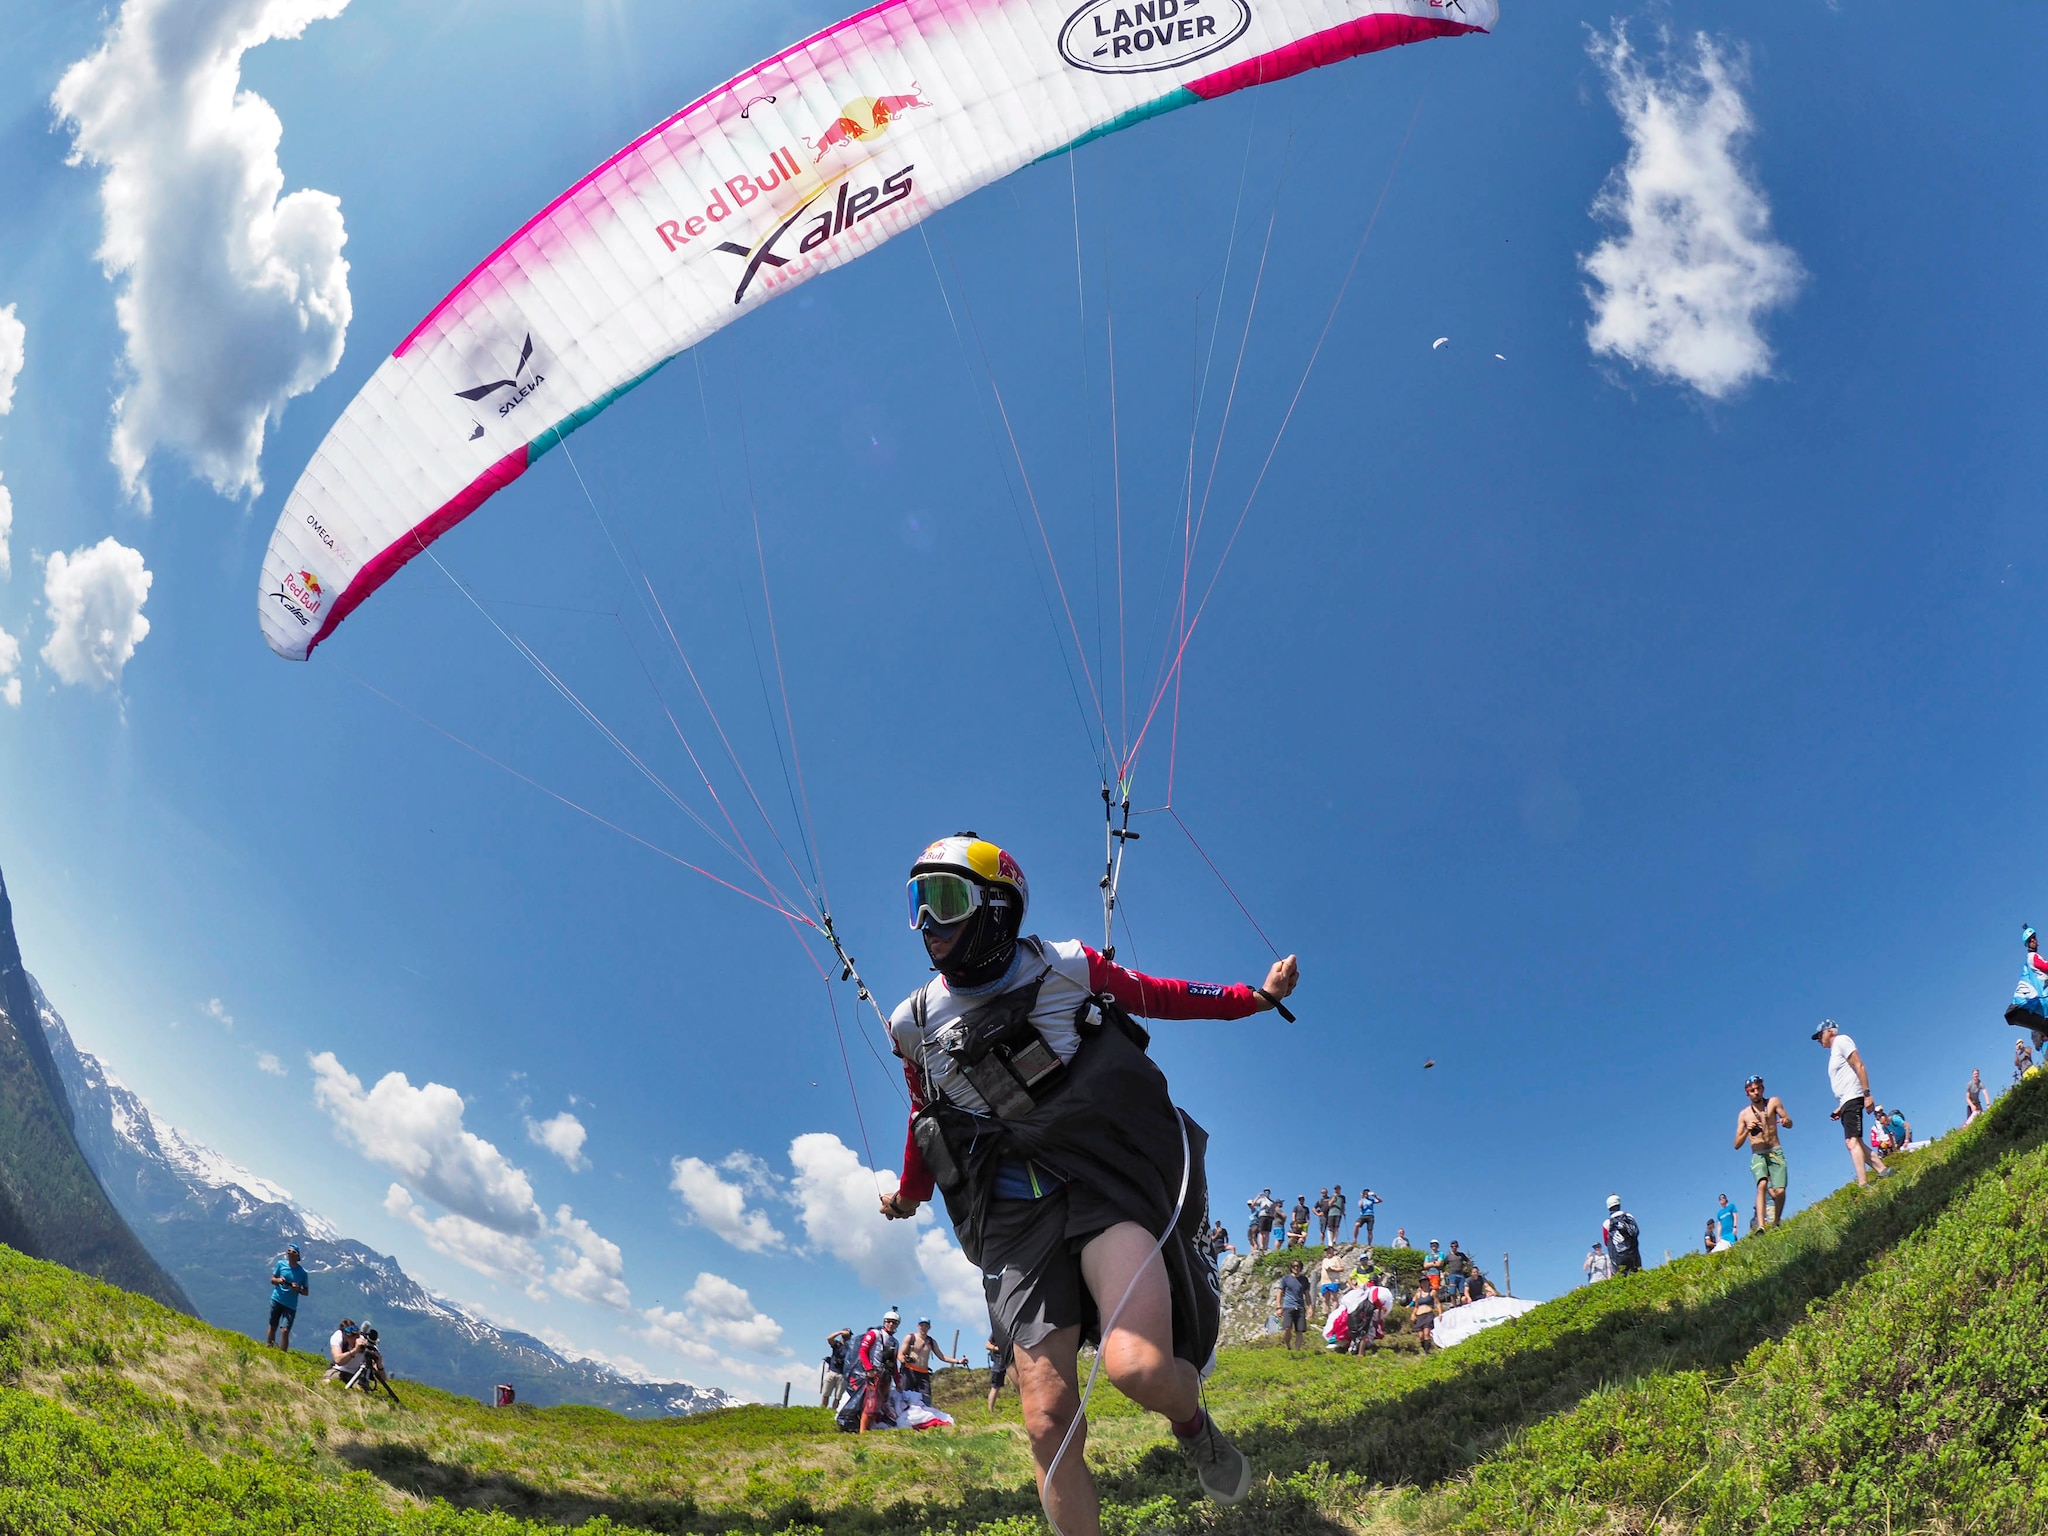 Aaron Durogati (ITA1) performs during Red Bull X-Alps 2021 prologue in Kleinarl, Austria on August 17, 2021